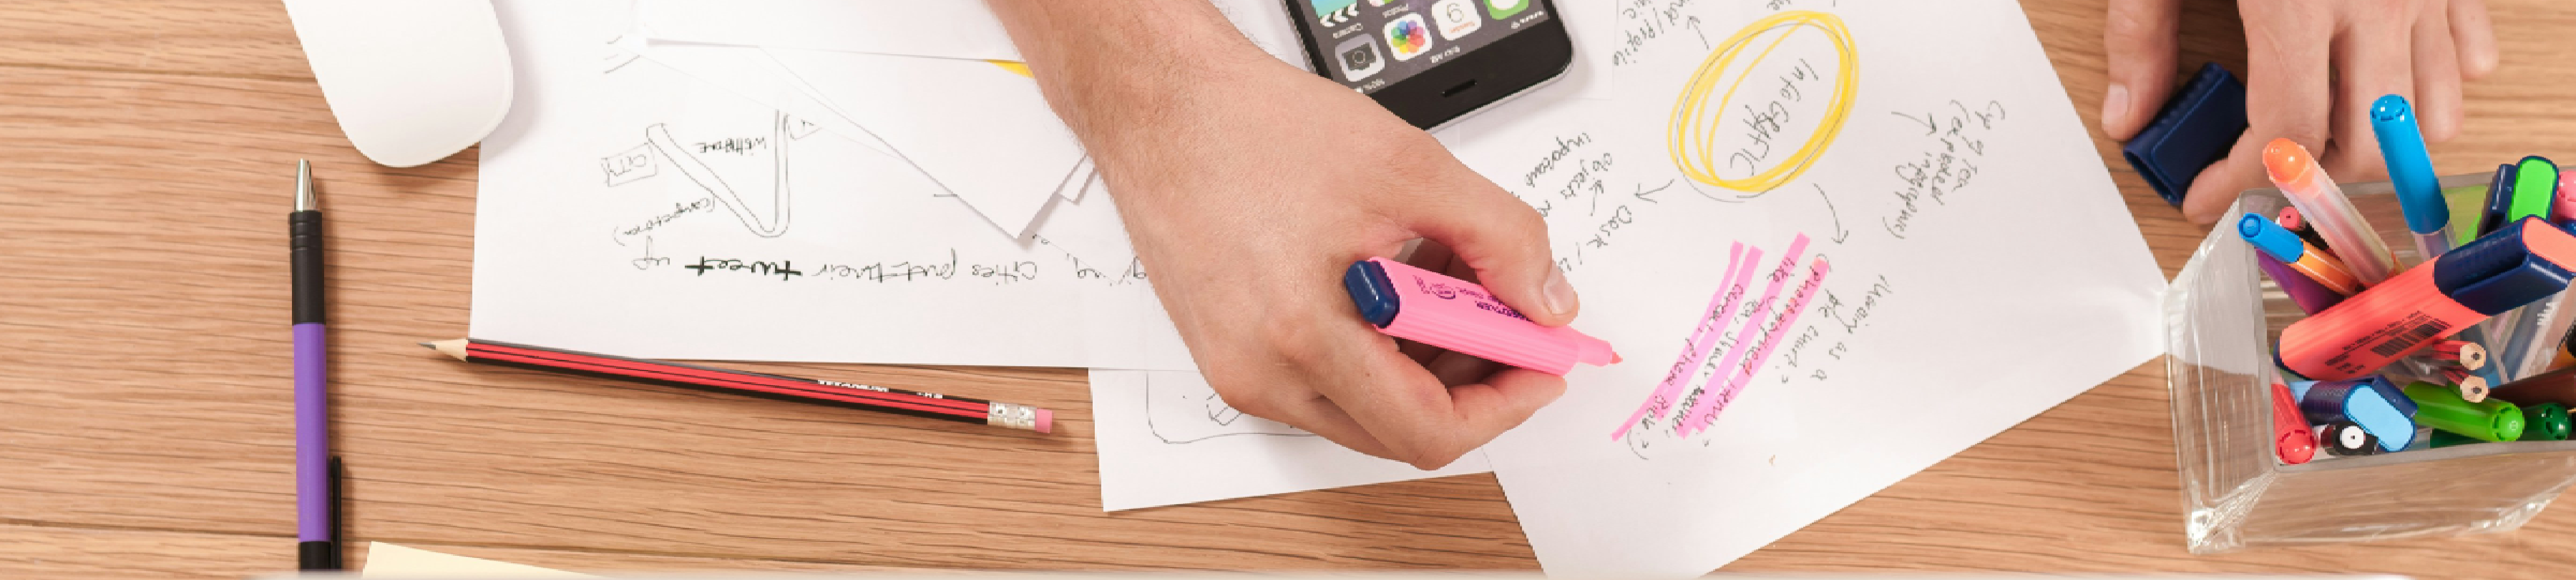 A photo of someone editing hand-written notes, highlighting texts and working across their phone, paper, and computer